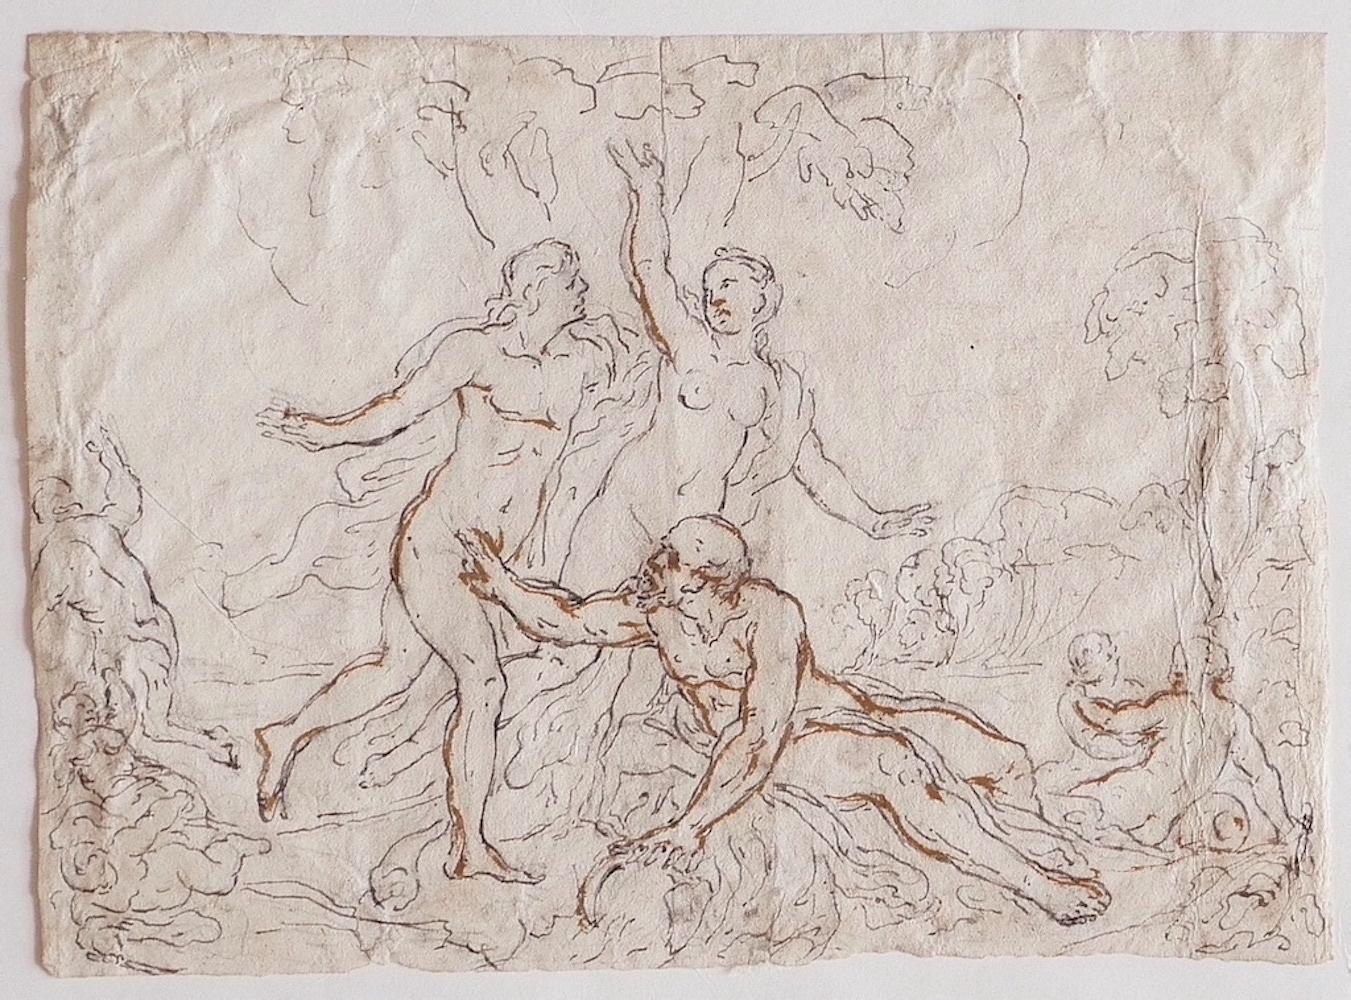 Unknown Figurative Art - Figures -  Pencil and Ink on Paper - 17th Century